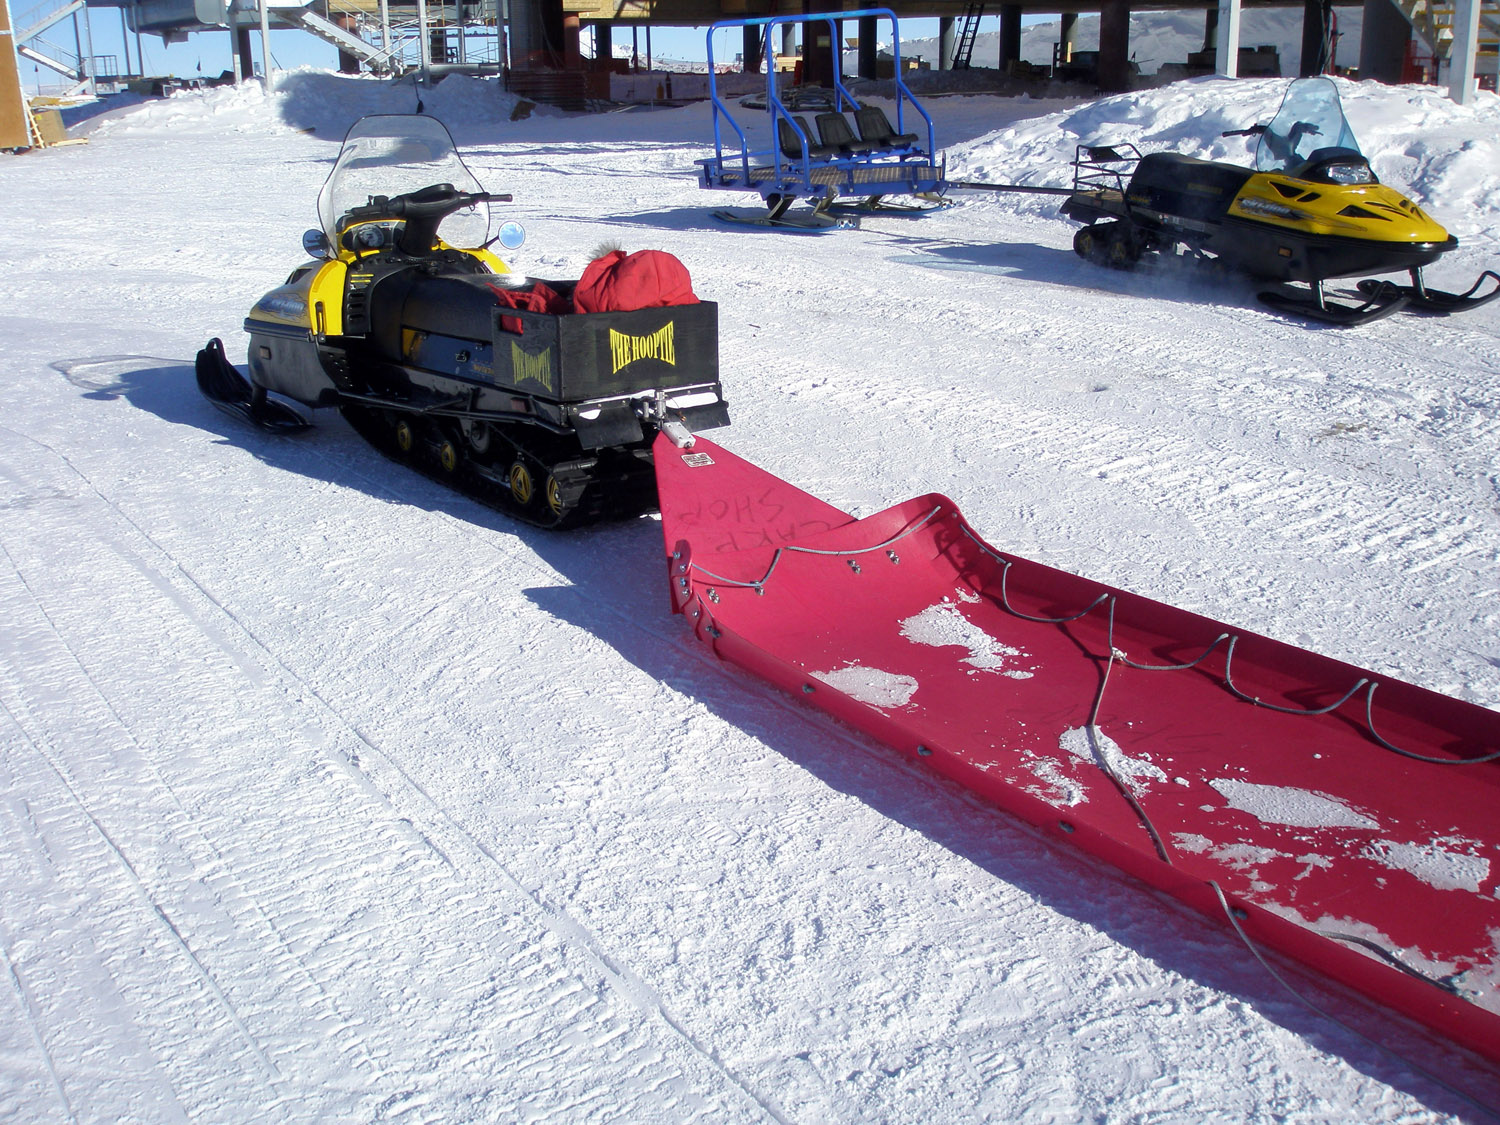 Vehicles - Snowmobile with sled